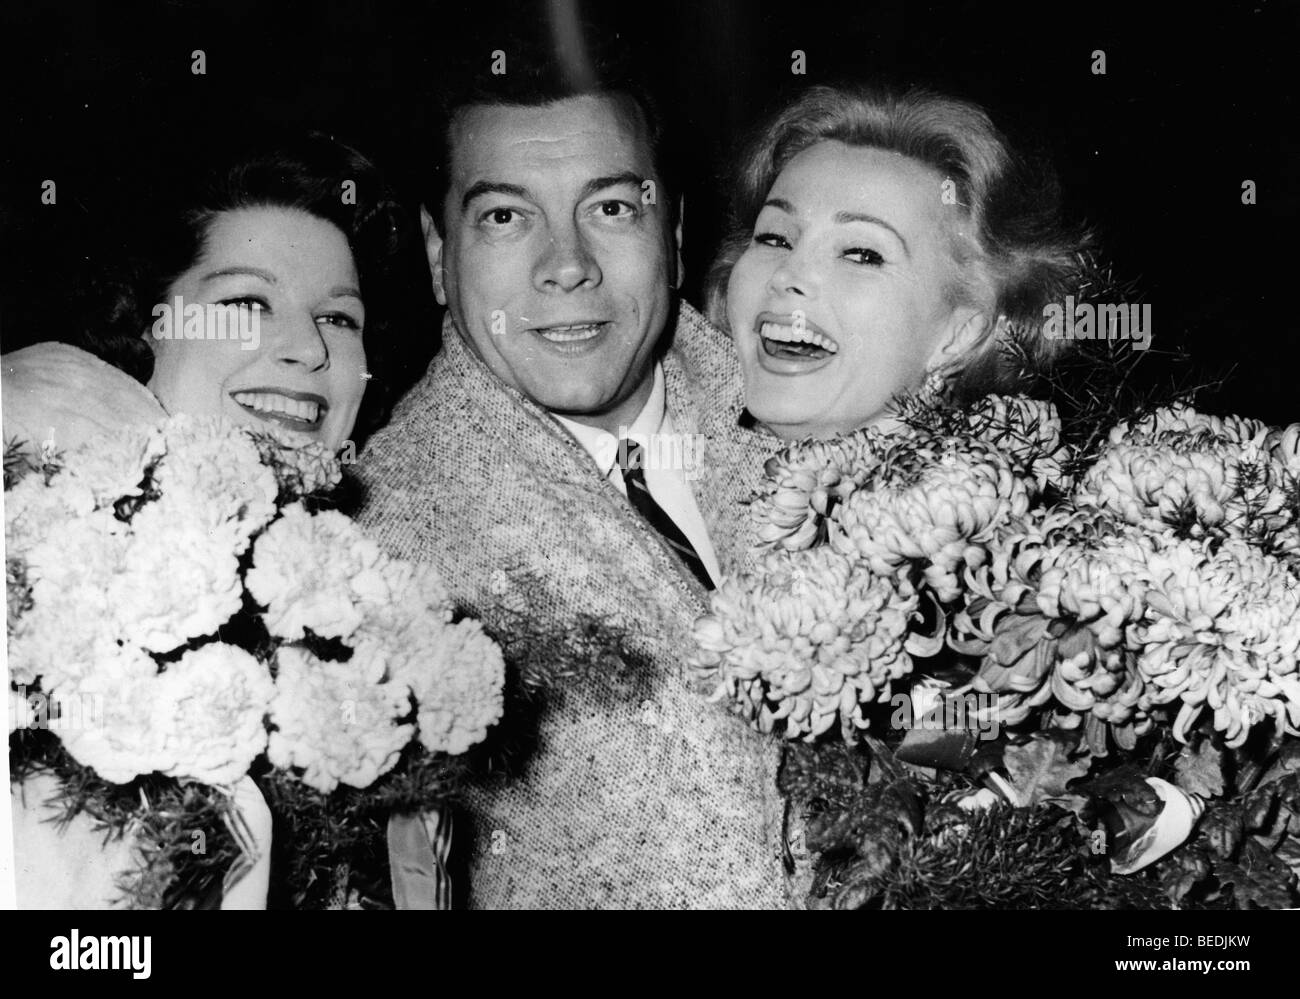 ZSA ZSA GABOR, right, laughs with two people and bunches of flowers. Stock Photo